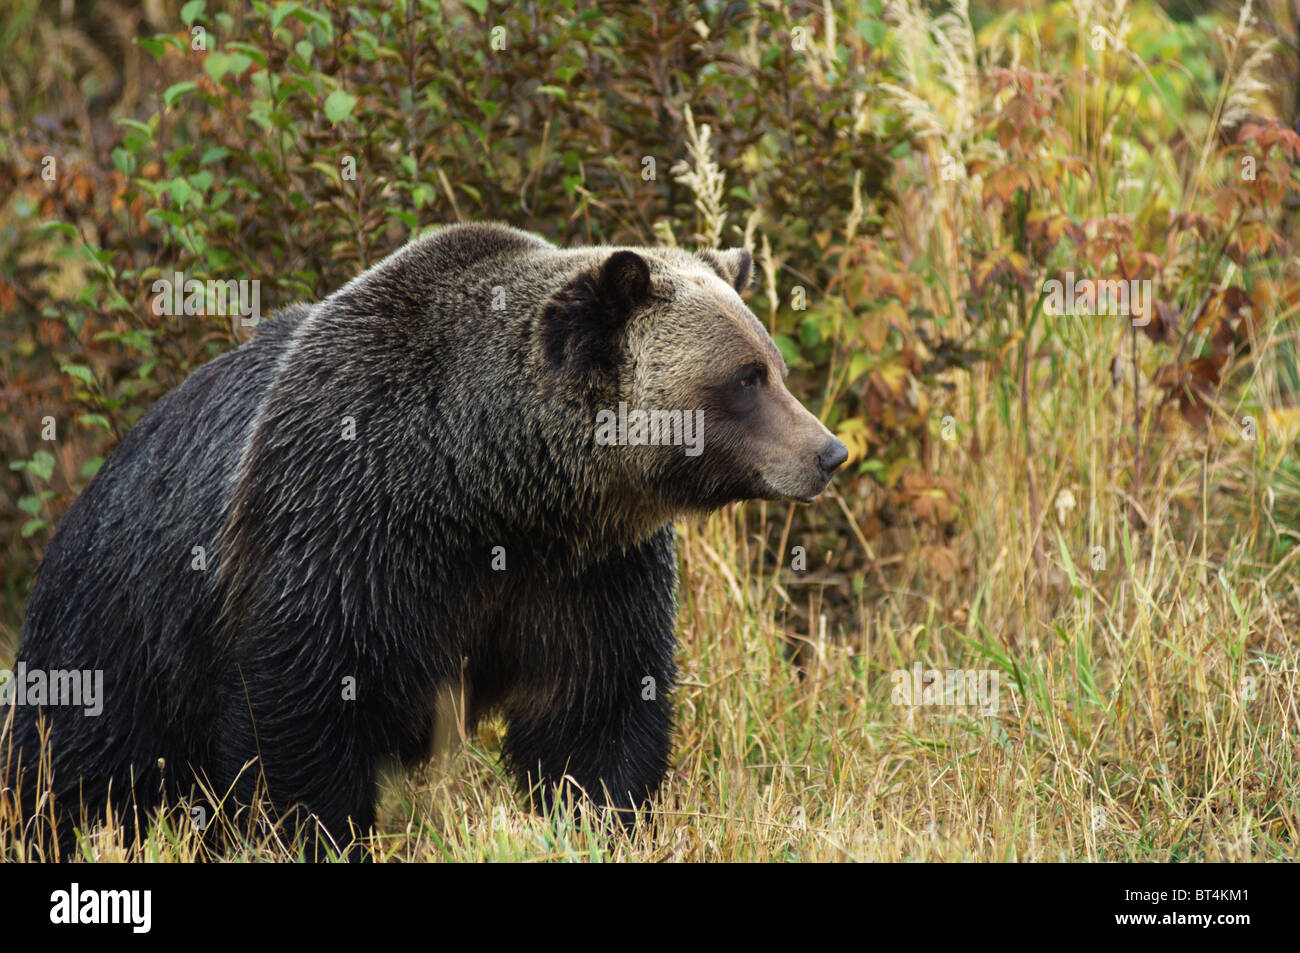 Male Grizzly Bear in mountain field Stock Photo